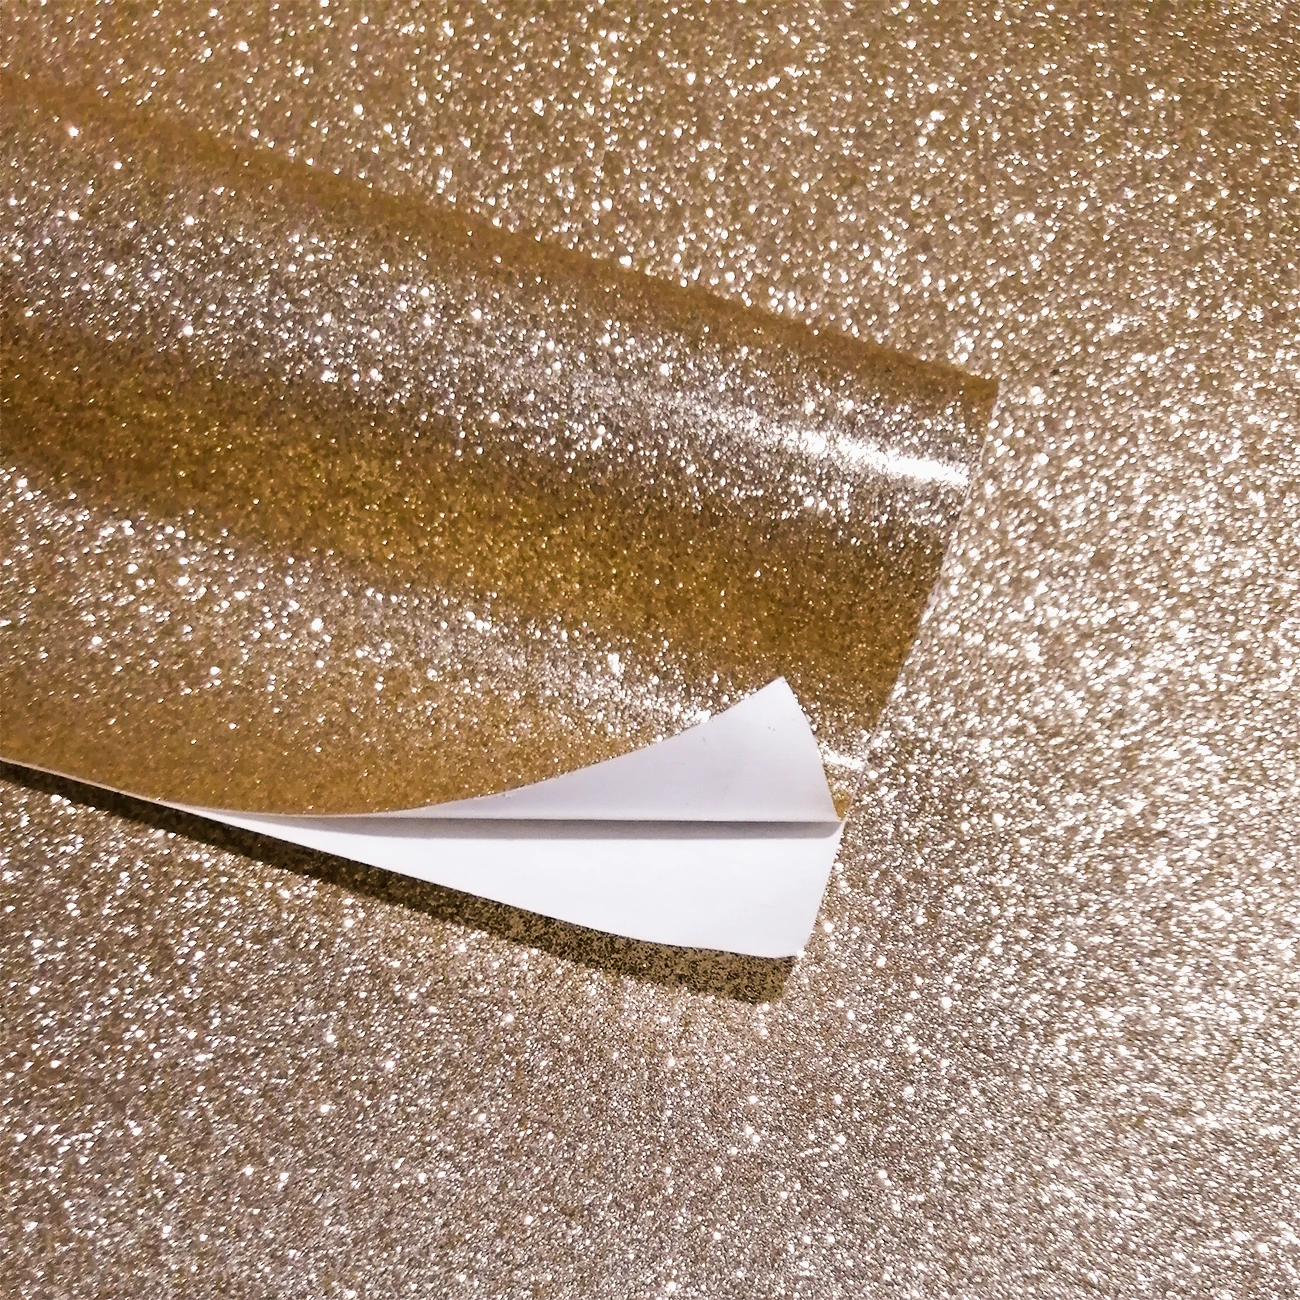 self adhesive glitter wallpaper Textured  Background waterproof contact paper peel and sticker bling wallcovering